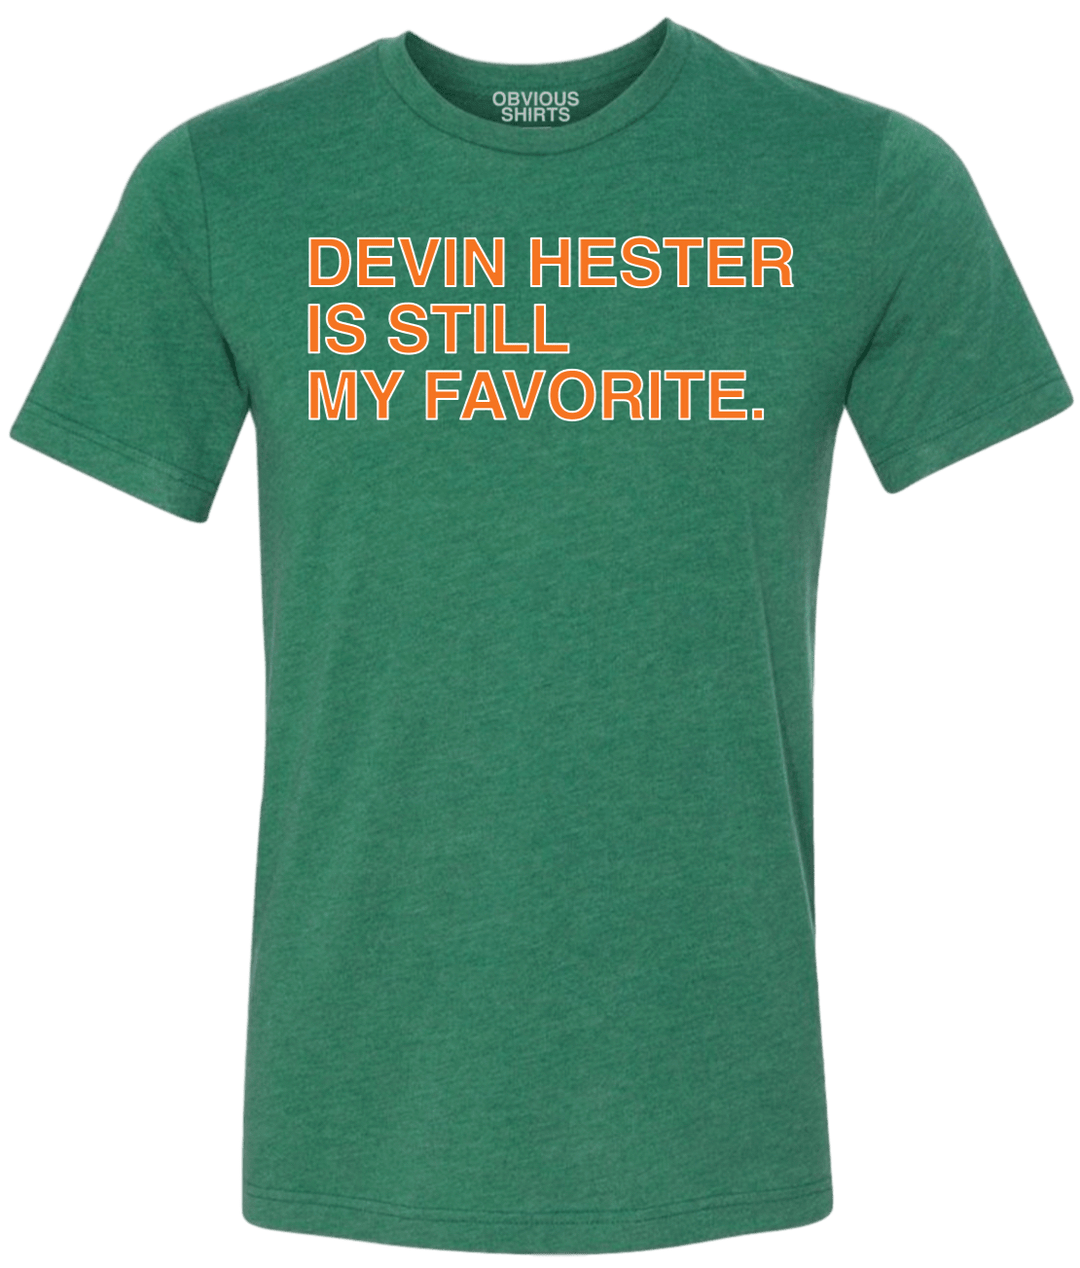 DEVIN HESTER IS STILL MY FAVORITE. (MIAMI) - OBVIOUS SHIRTS